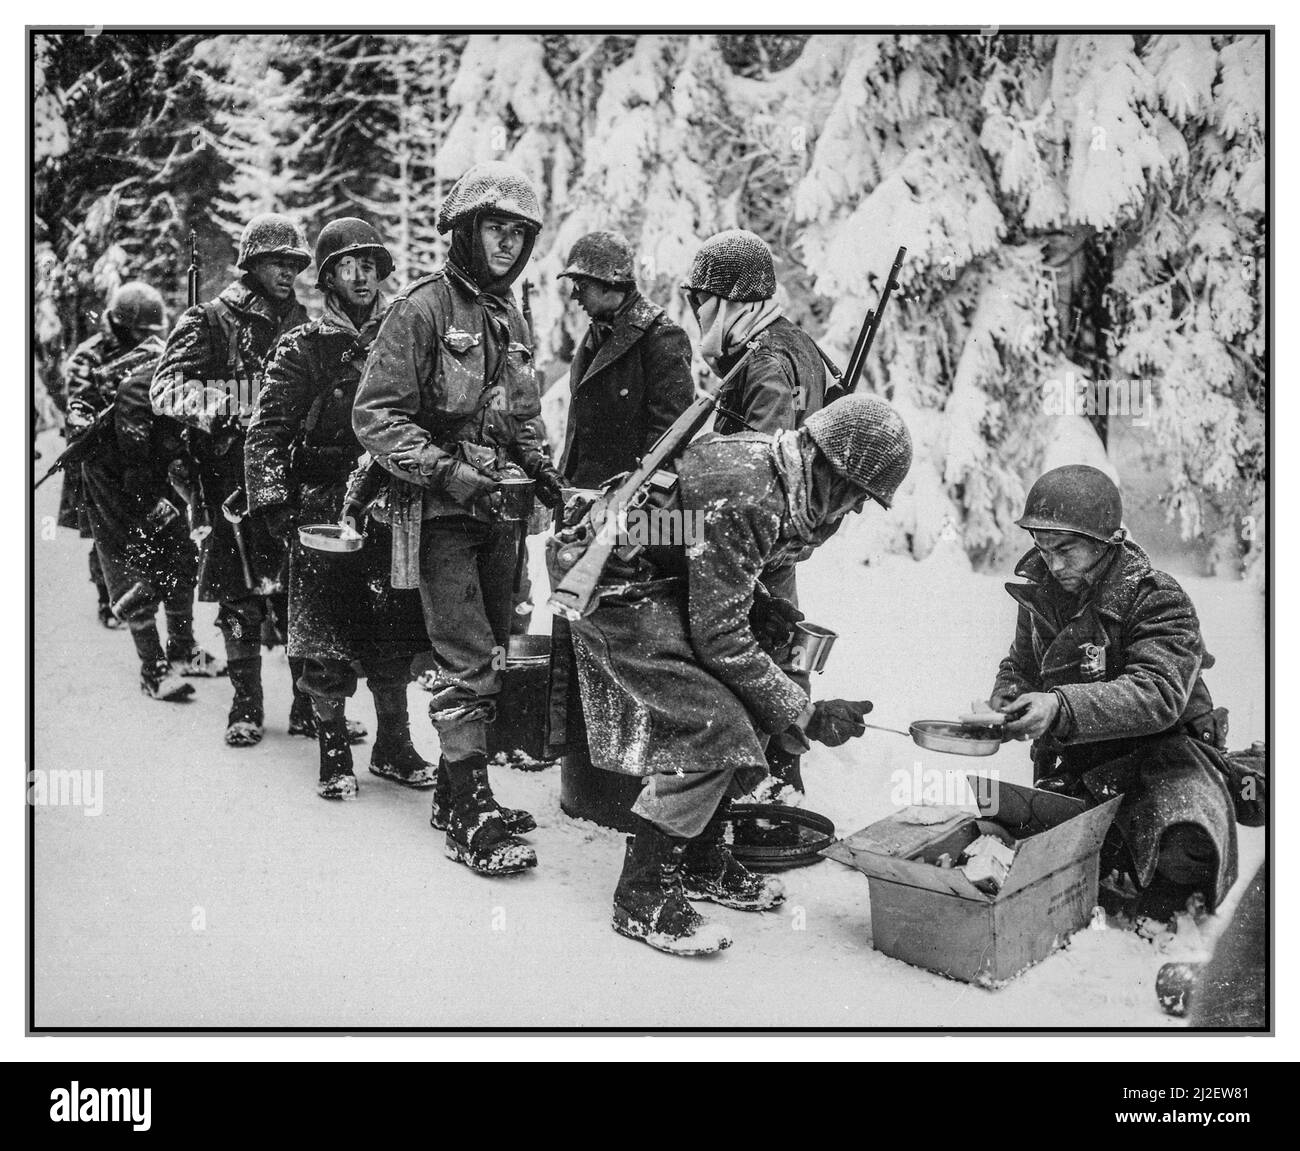 WW2 BATTLE OF THE BULGE ARDENNE ARDENNES Infantry Hot Winter Food Rations are served to American Infantrymen in freezing conditions on the move during their Forest of Ardenne advance to La Roche, Belgium. 347th US Infantry Regiment Winter snow conditions 13 January 1945 World War II Second World War Stock Photo